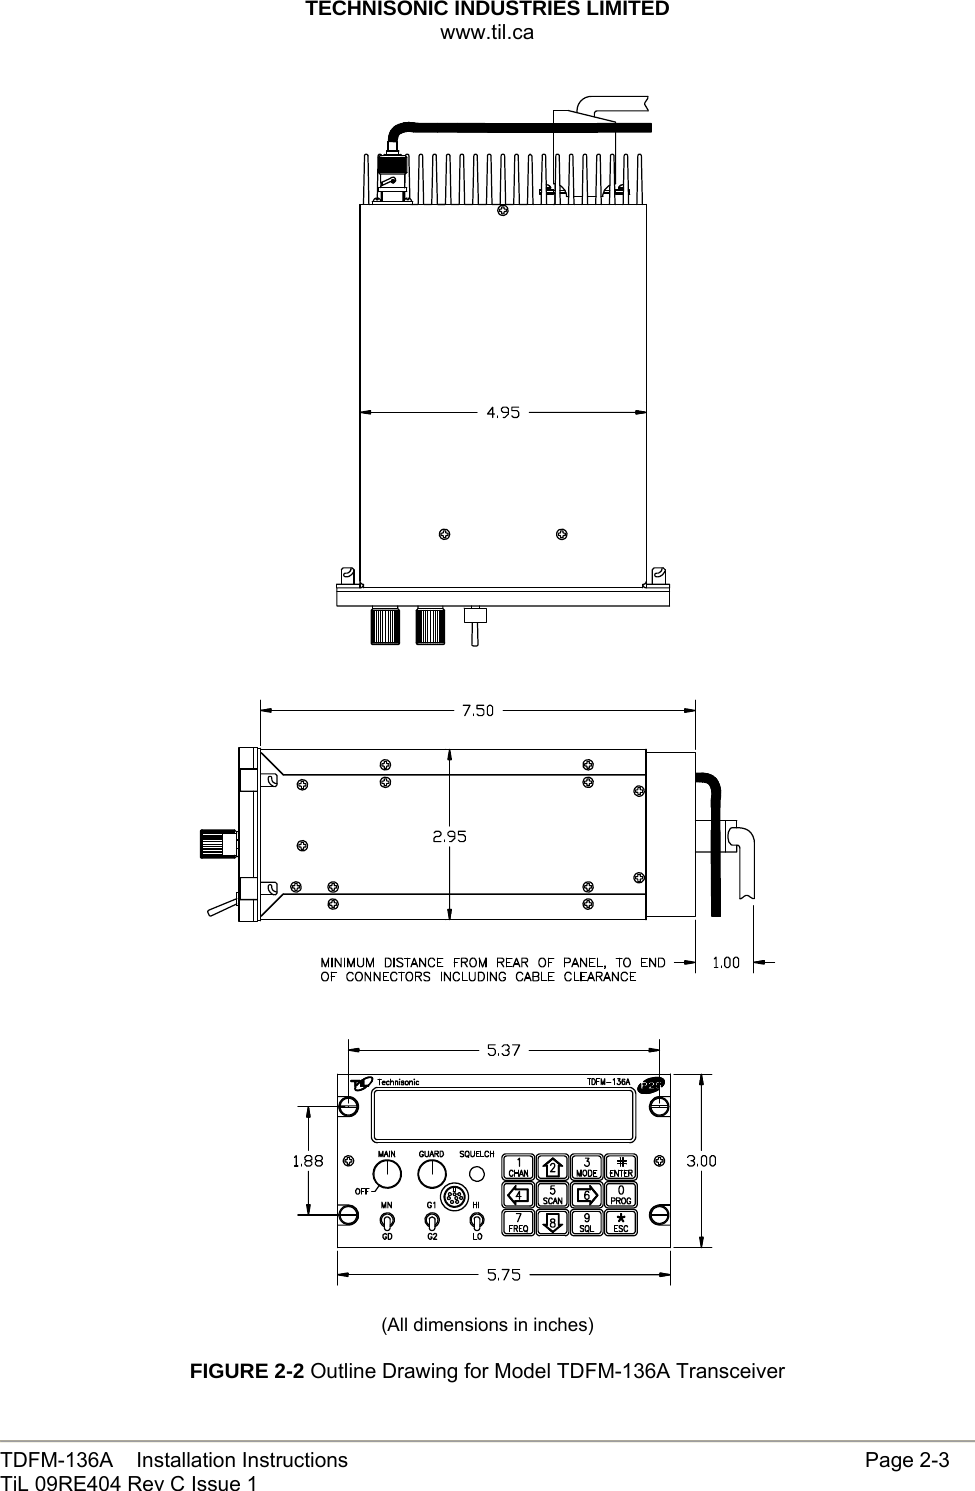 TECHNISONIC INDUSTRIES LIMITED www.til.ca   TDFM-136A    Installation Instructions                     Page 2-3 TiL 09RE404 Rev C Issue 1    (All dimensions in inches)  FIGURE 2-2 Outline Drawing for Model TDFM-136A Transceiver 